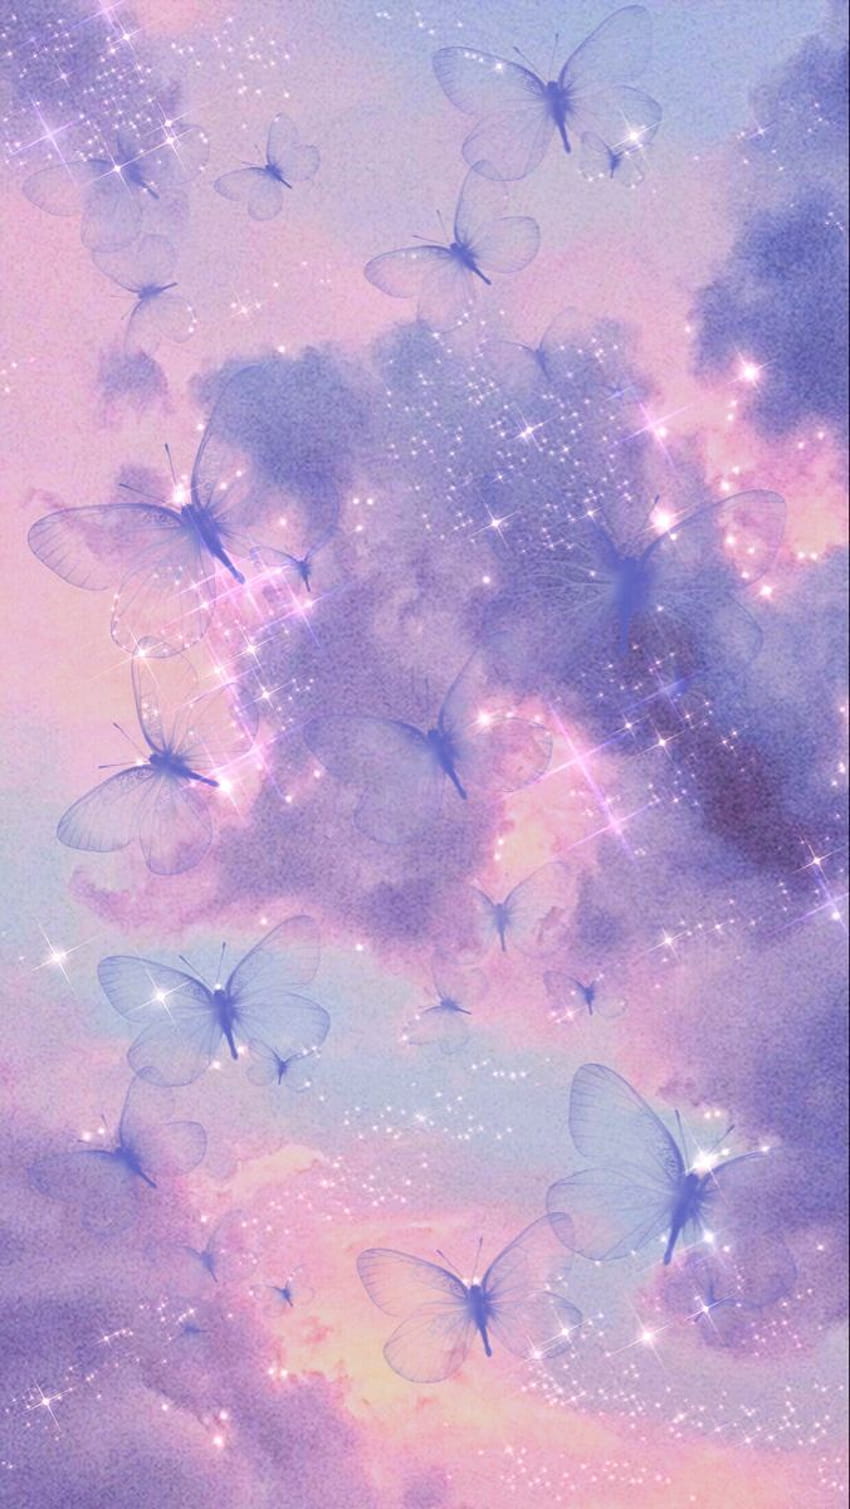 Aesthetic Butterflies posted by Ethan Simpson, iphone purple butterfly HD phone wallpaper